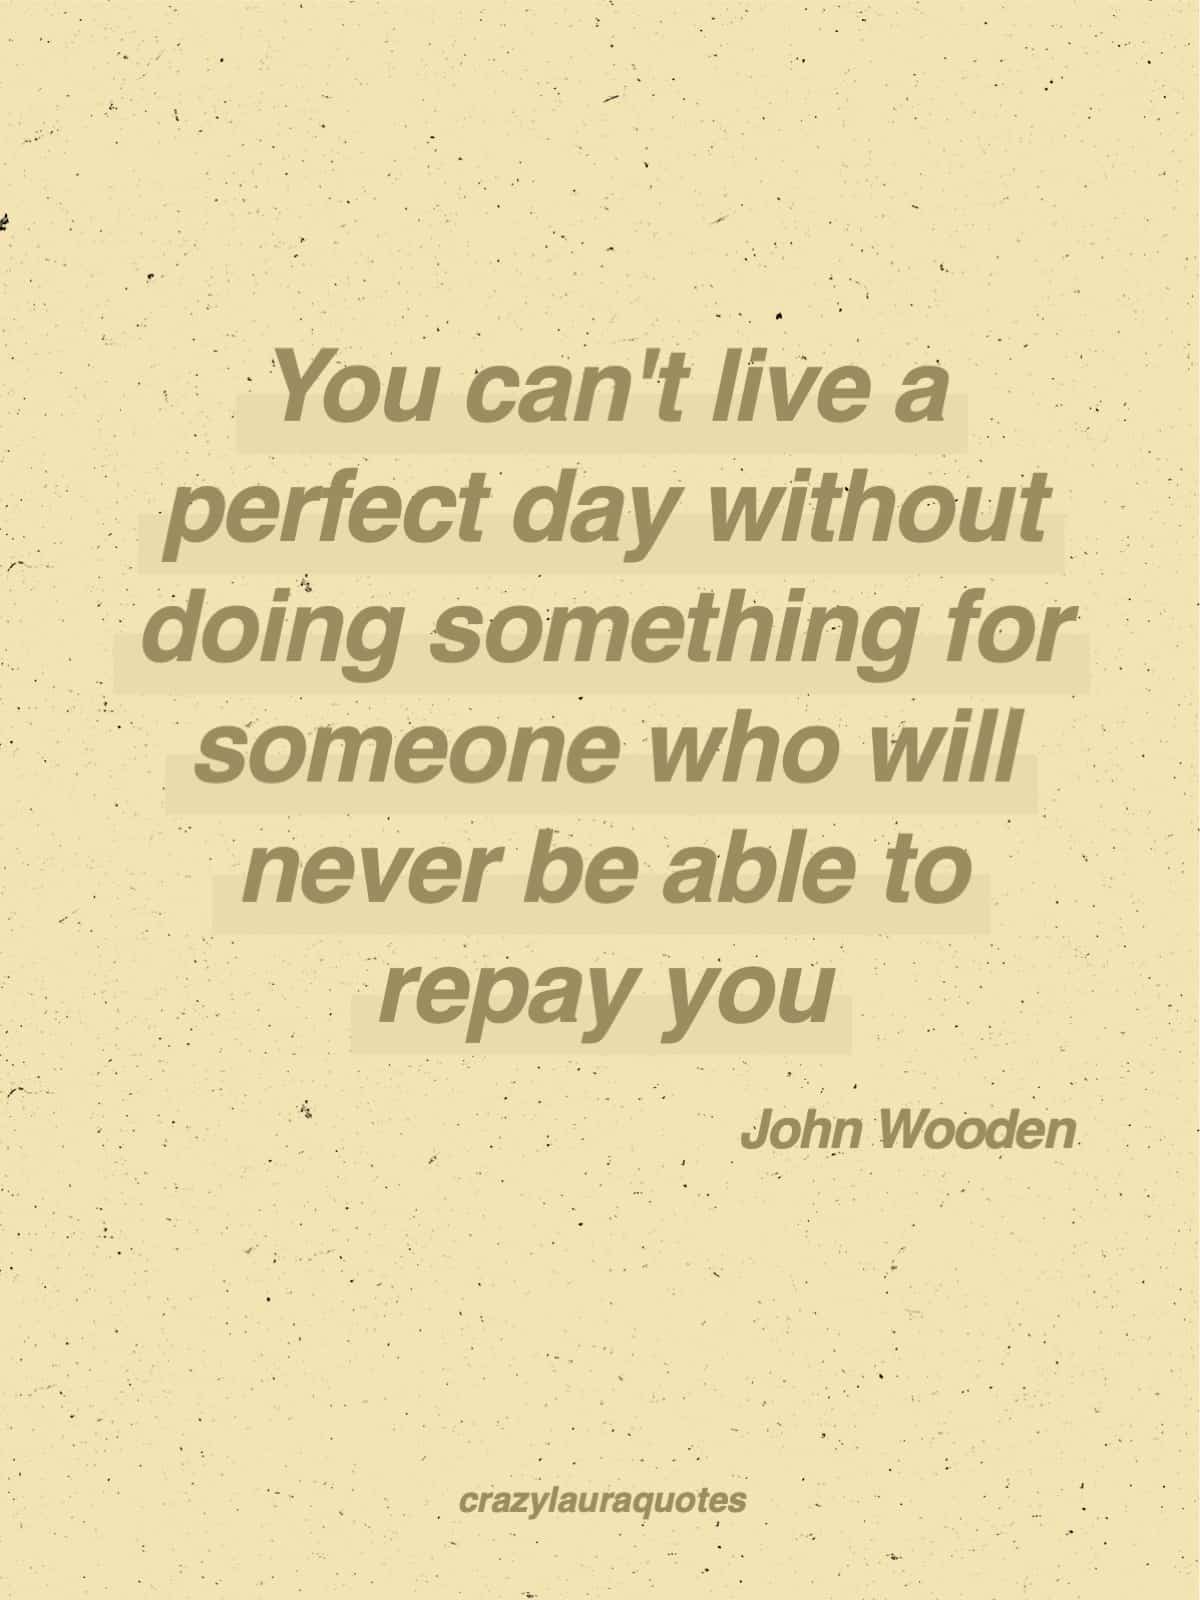 do something for someone john wooden quote